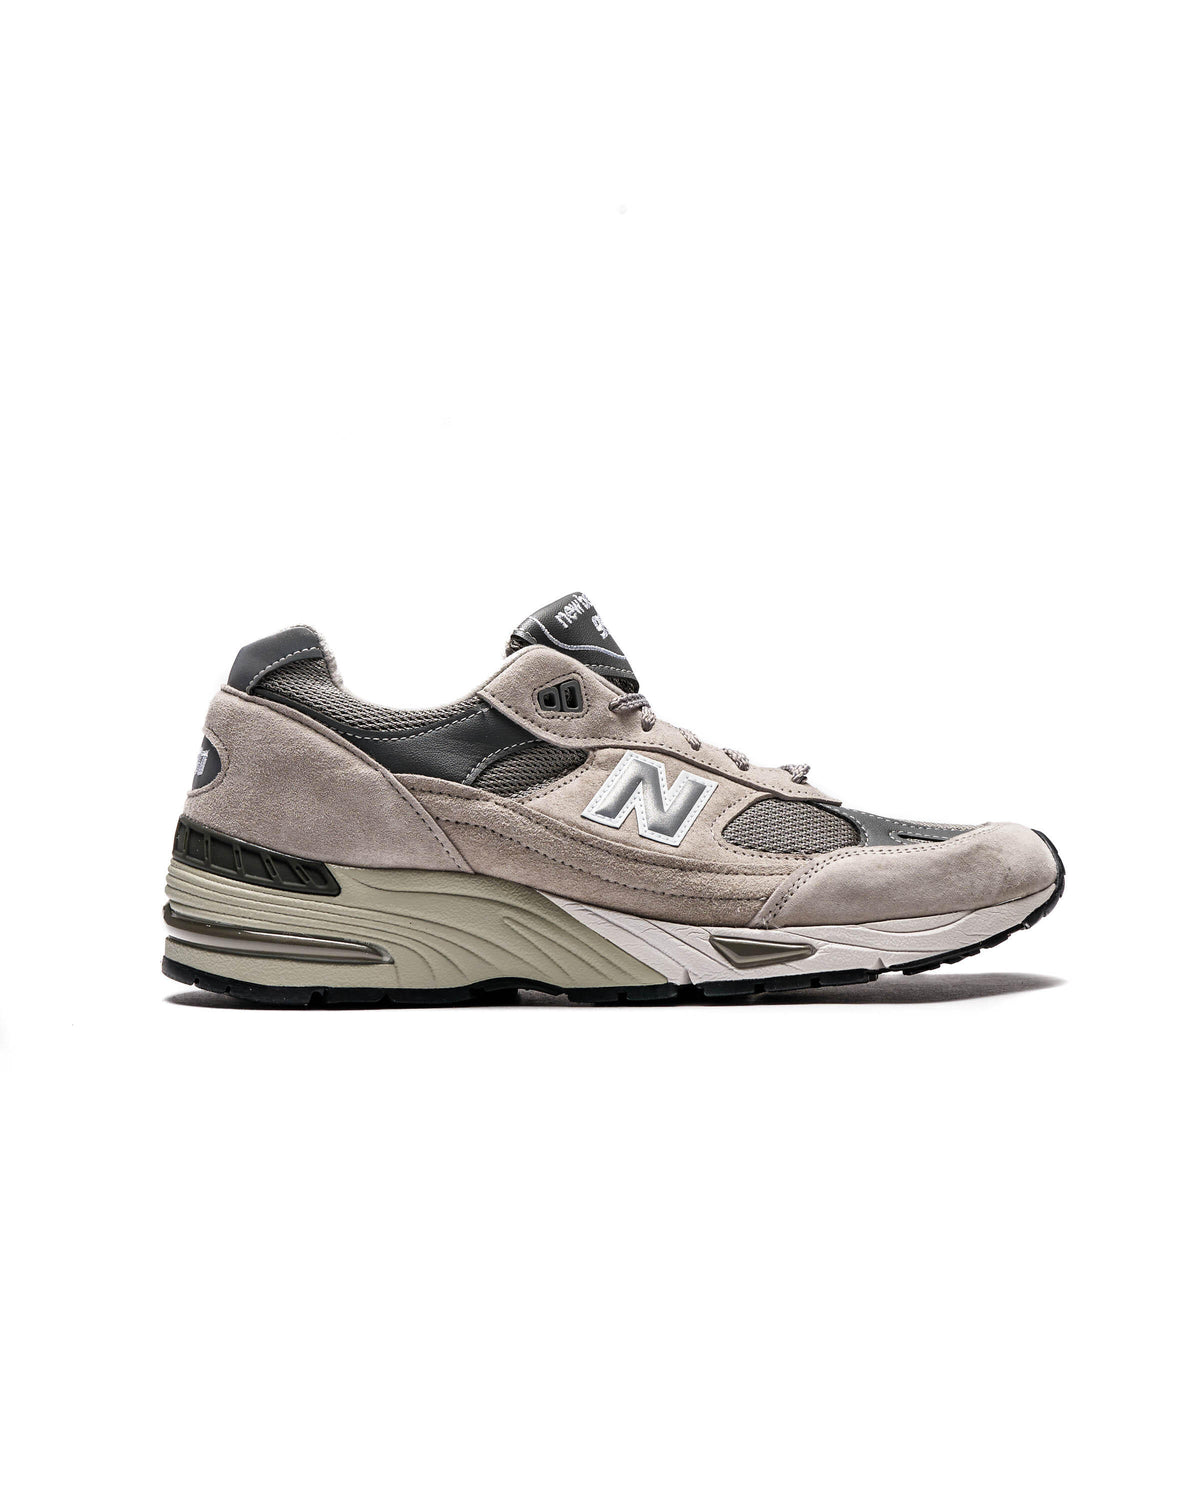 New Balance M 991 GL - Made in England